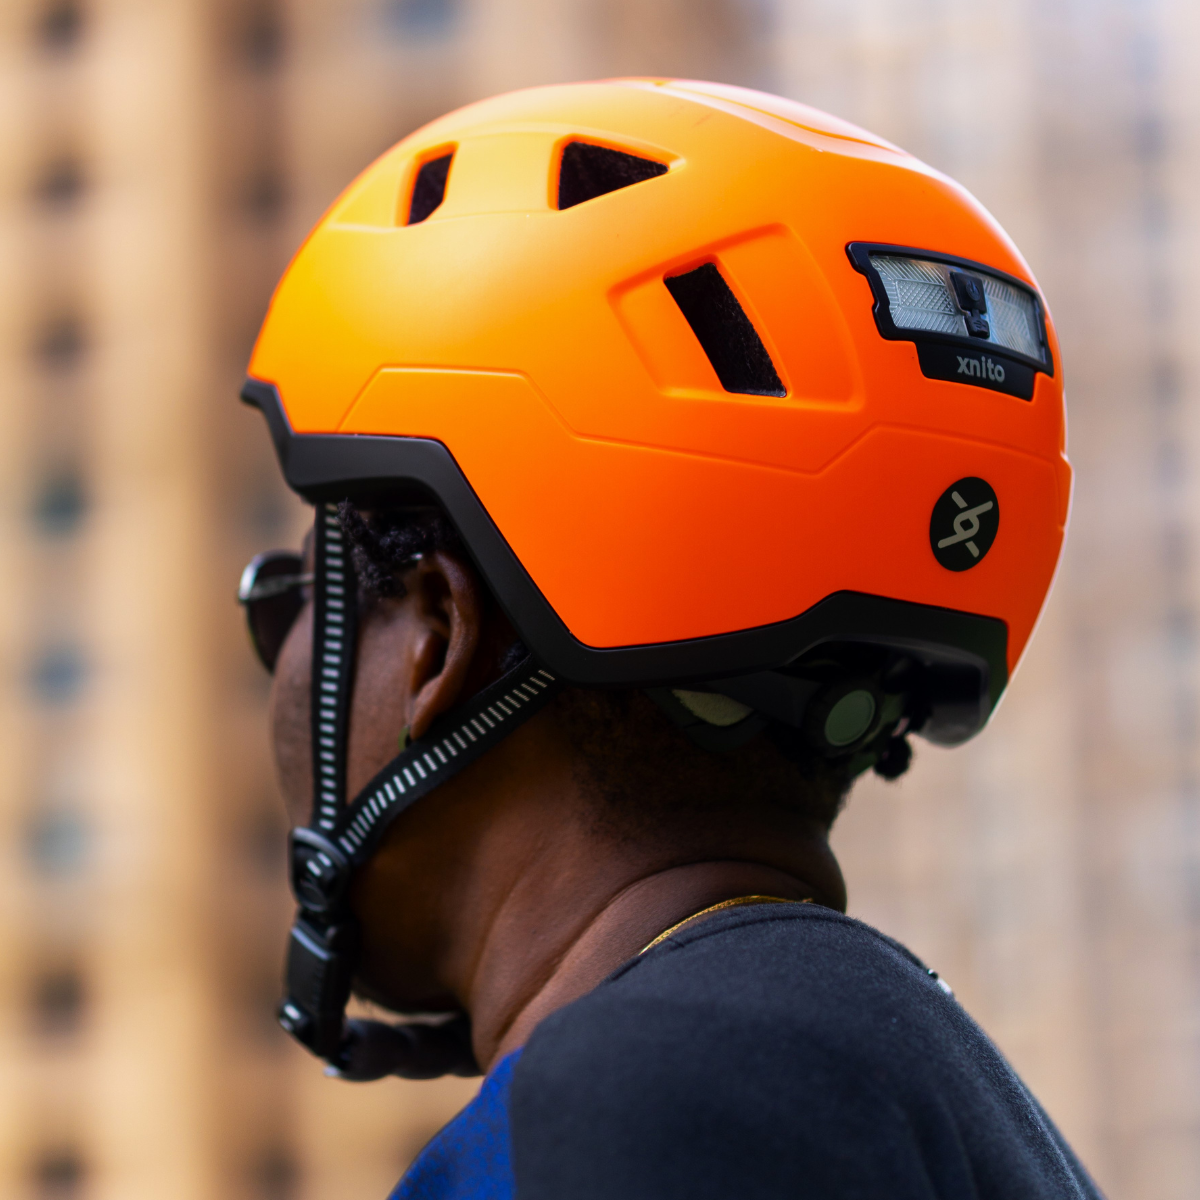 side view of xnito ebike helmet showing lights